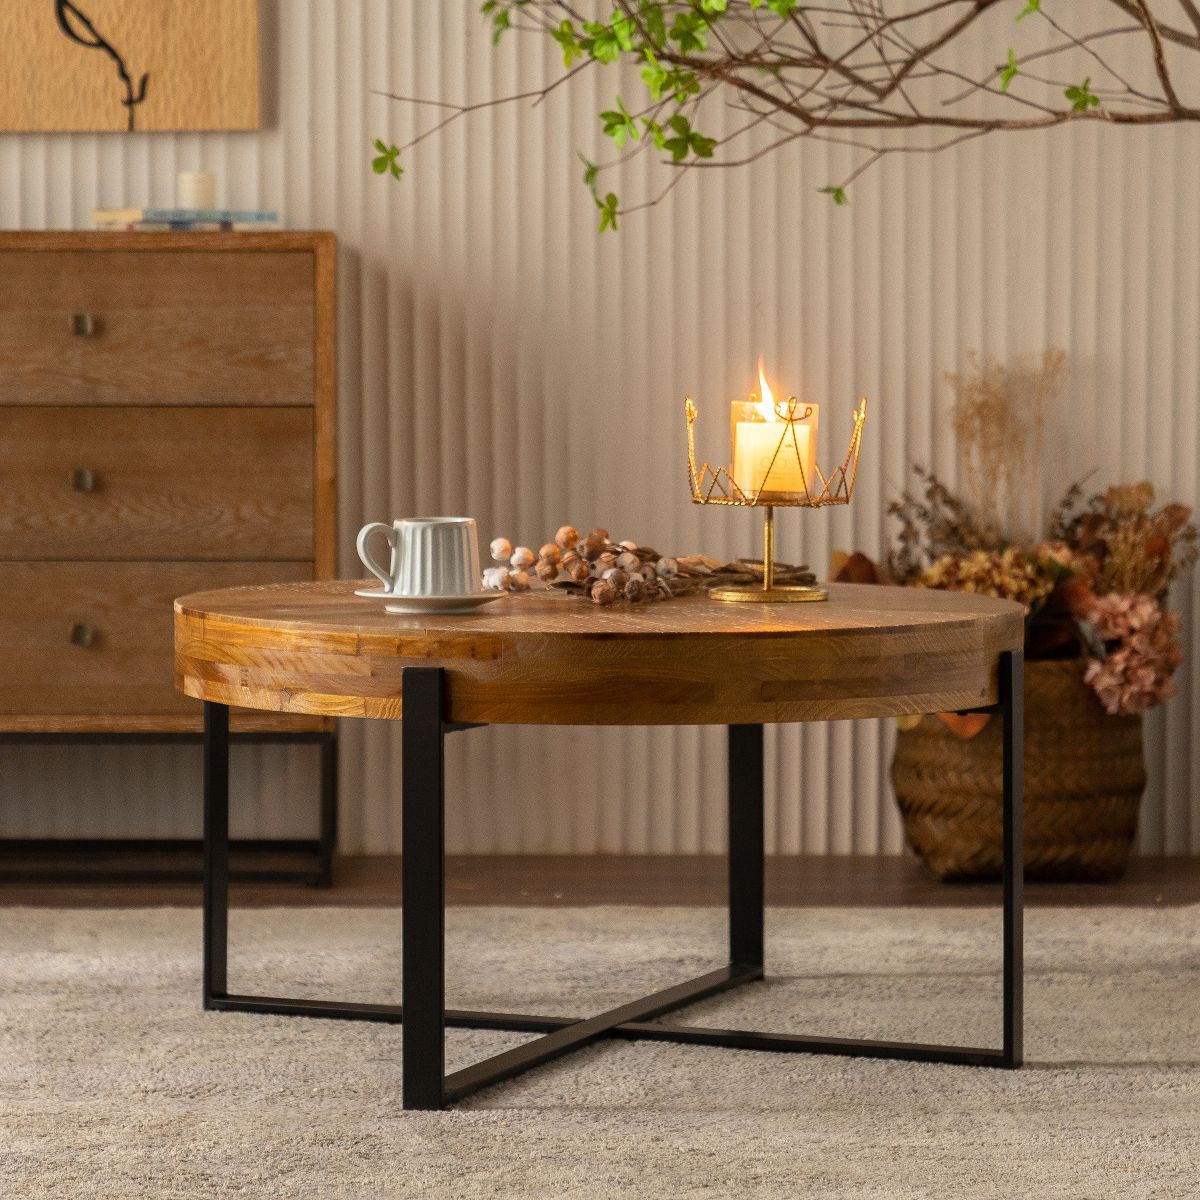 33.86" Modern Retro Splicing Round Coffee Table,Fir Wood Table Top with Cross Legs Base - ModernL... | Target